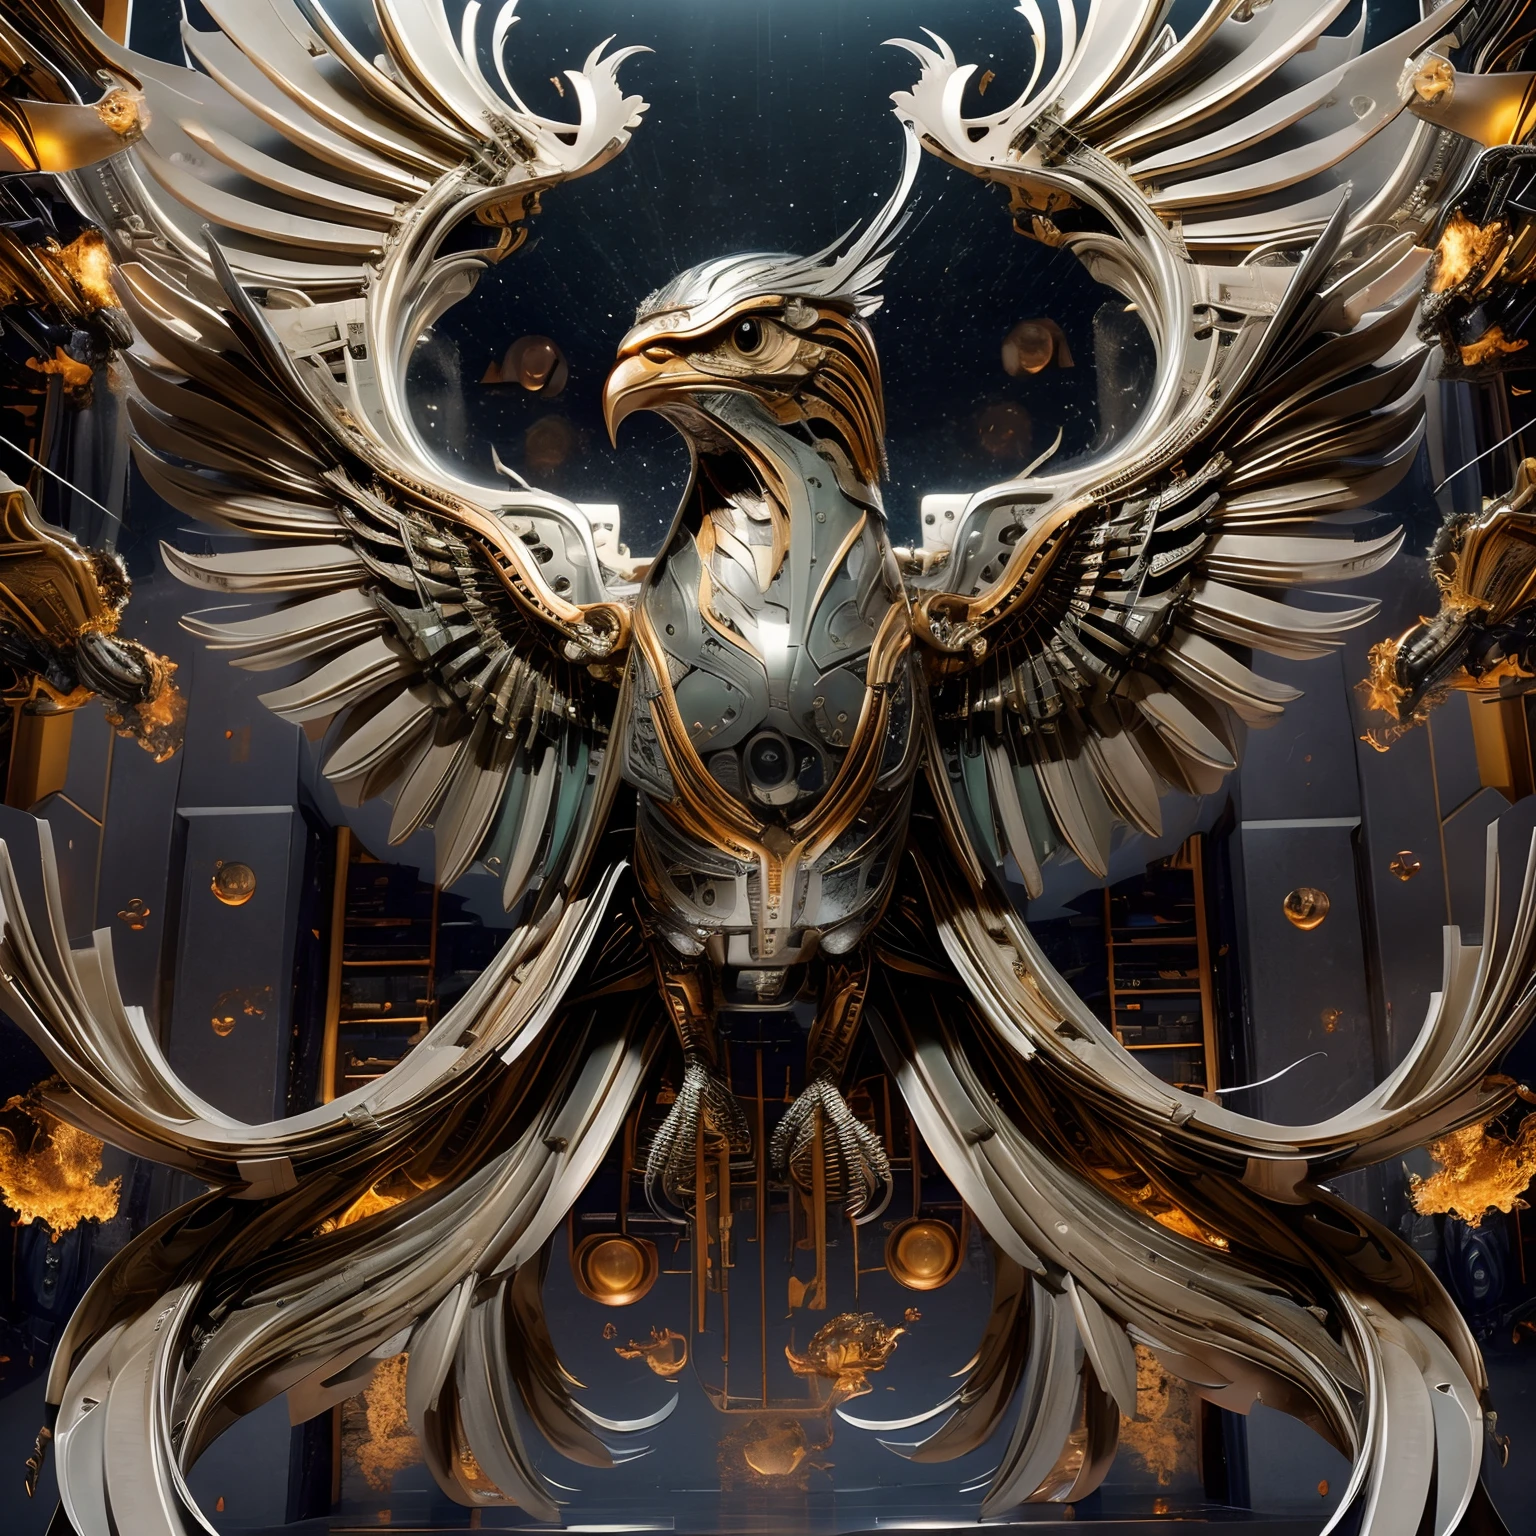 ((Best quality)), ((Masterpiece)), (Very detailed: 1.3), 8K, Giant mechanical phoenix, Wings, eagle claws, feater, Metallic texture, Futuristic style, mechanicalparts, High-tech, Sharp eagle beak，(The whole body is fiery red)，(Bubbling with fire)，intricately details, Majestic, Flying pose, Dynamic composition, Vibrant colors, Best lightning, dystopian, Full view, soaring through the sky